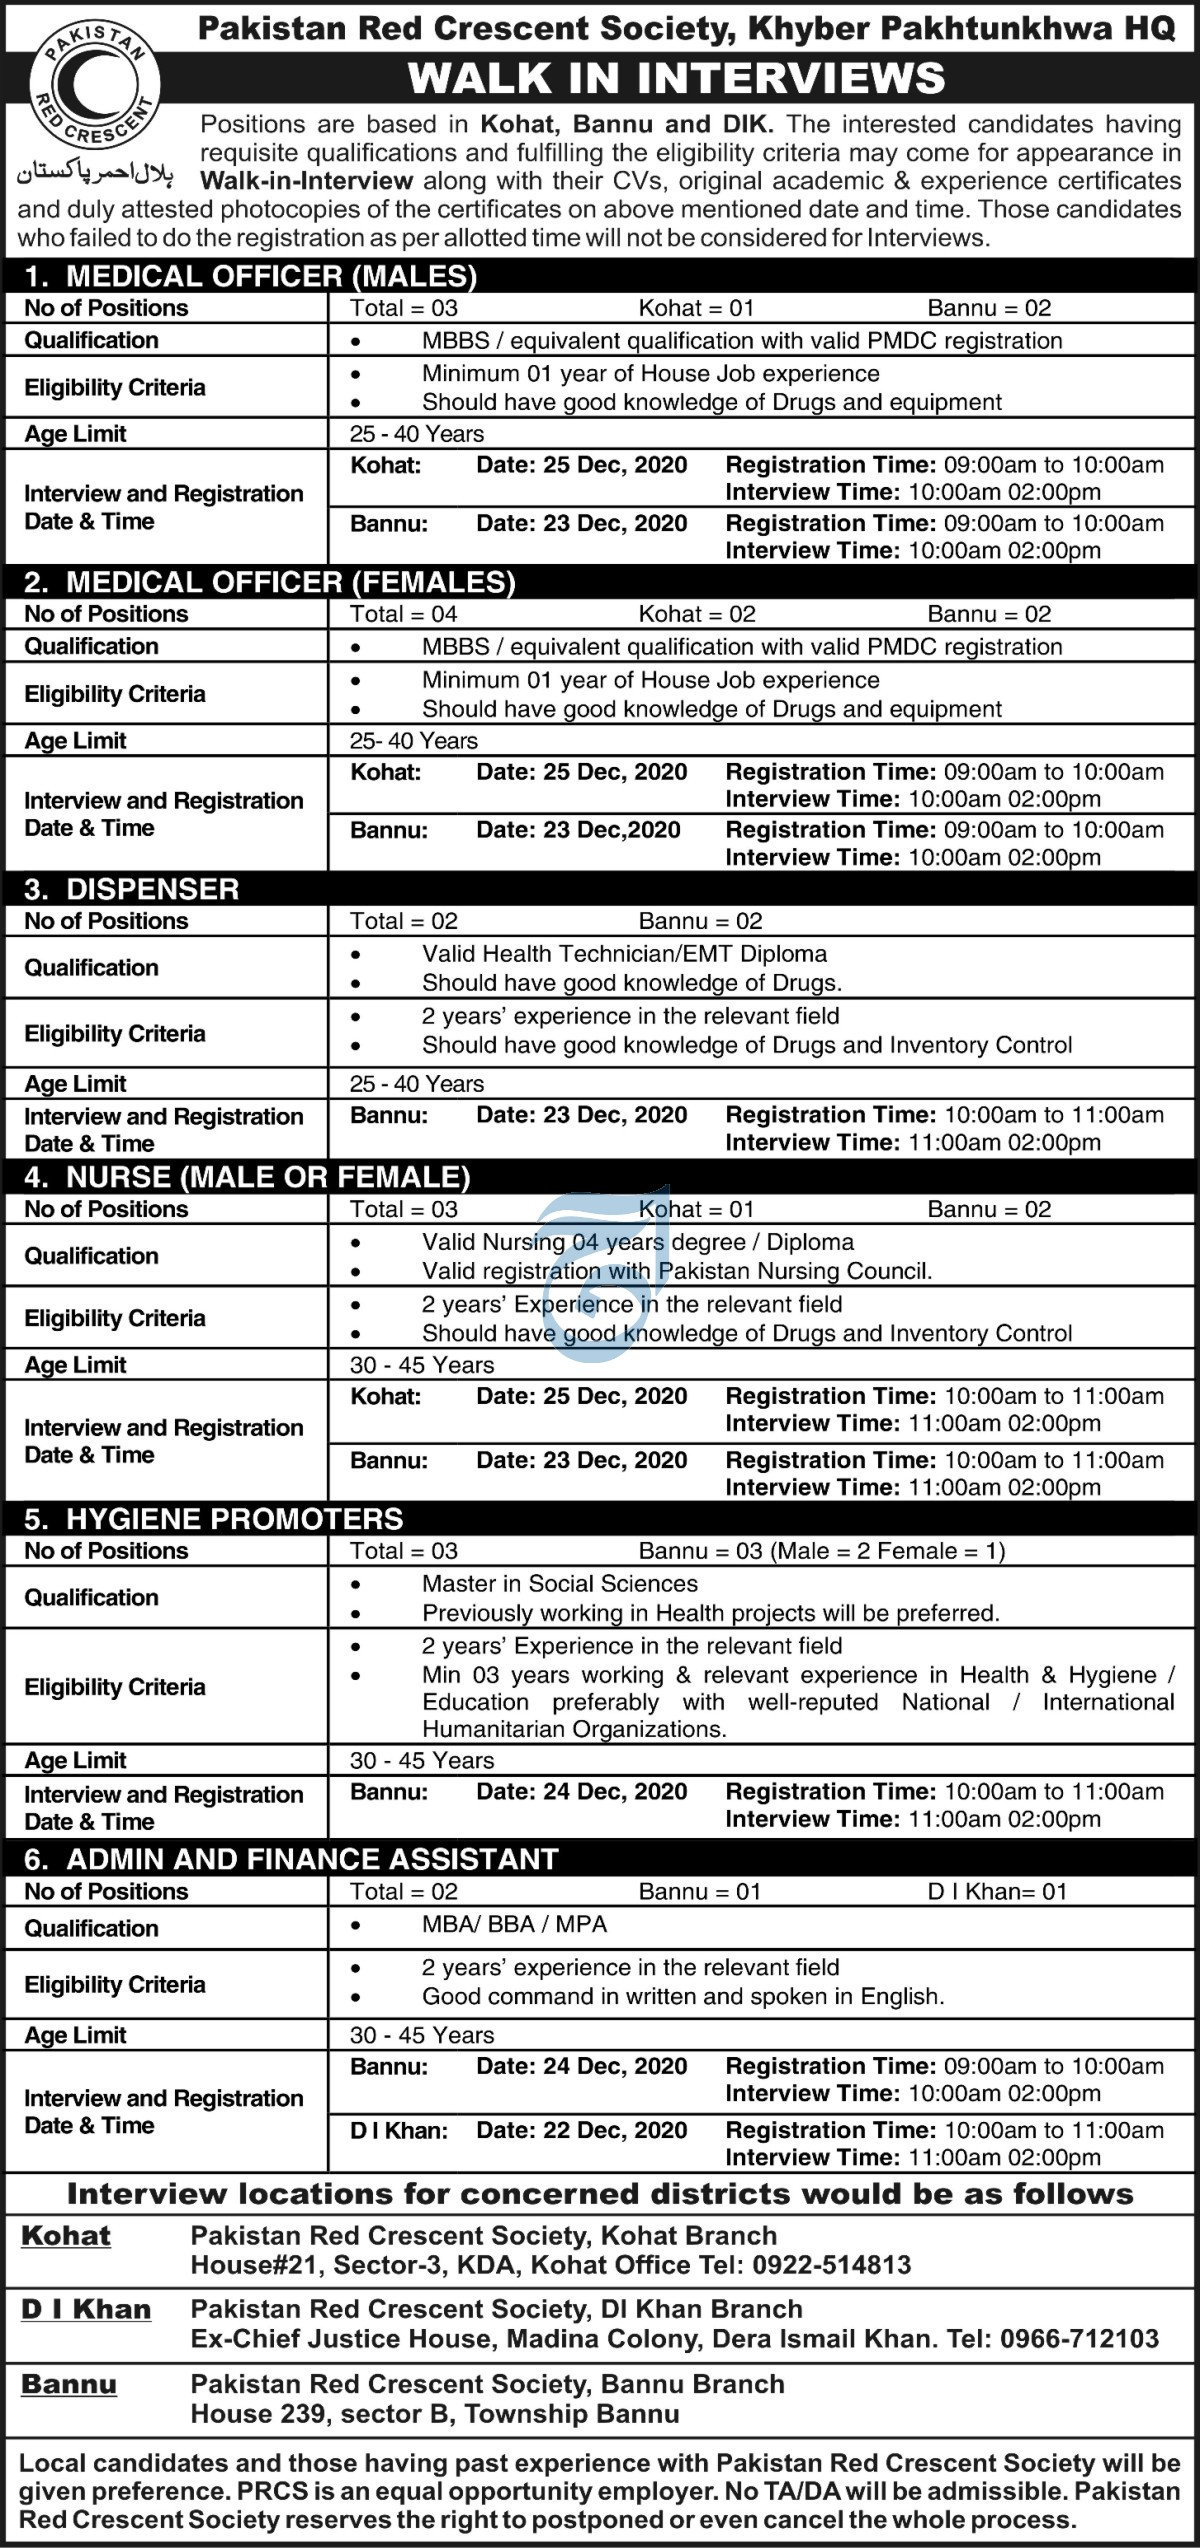 PRCS Jobs in Bannu Pakistan Red Crescent Society